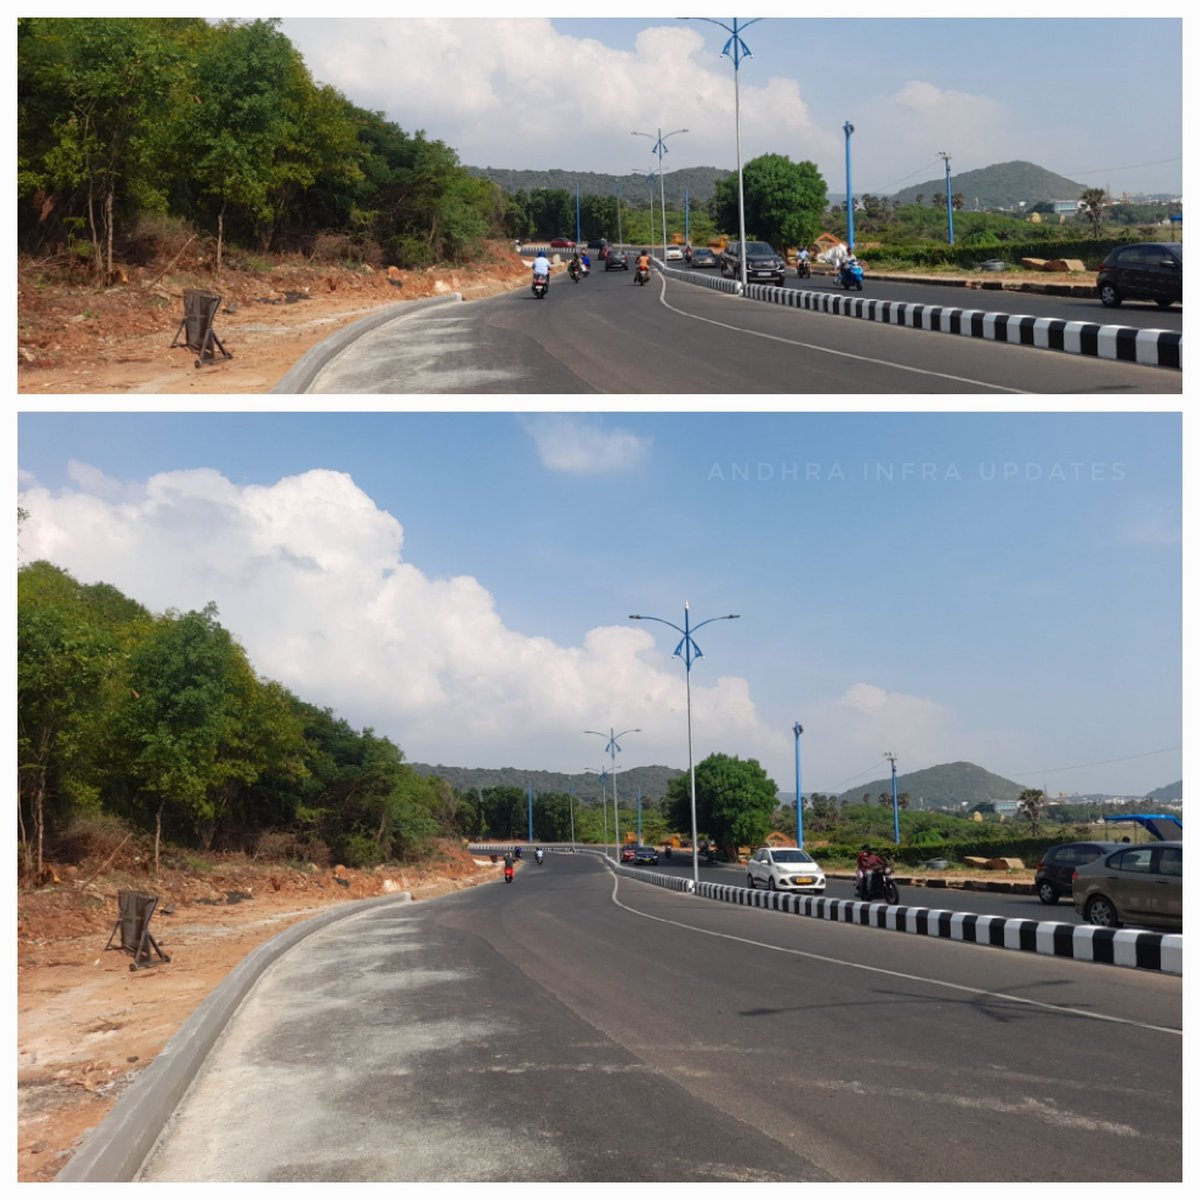 Newly laid 80 ft double beach road from #Seethakonda Seaview Point to #Visakha Valley Jn  & Central Lighting works have been completed.

#Vizag
#AndhraPradesh
#AndhraRoads
#VizagRoads
#AndhraInfra
#Hyderabad

Source : Sudher